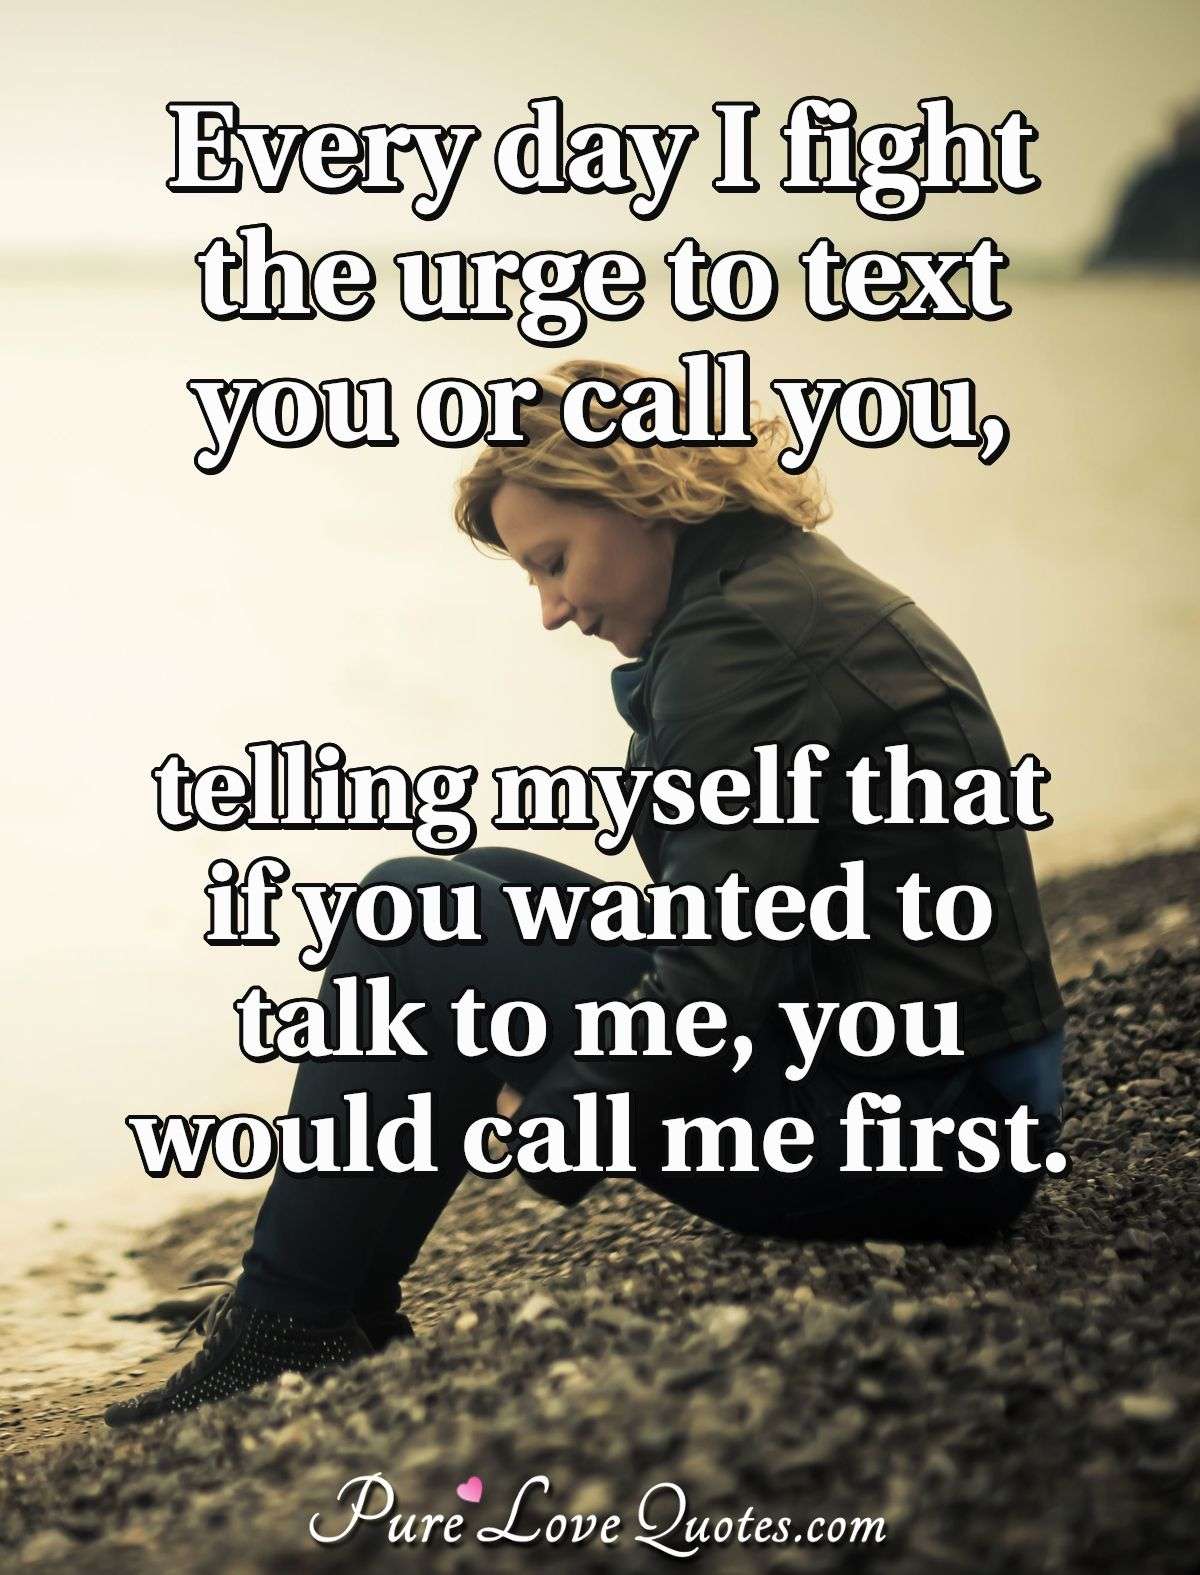 Every day I fight the urge to text you or call you, telling myself that if you wanted to talk to me, you would call me first. - Anonymous